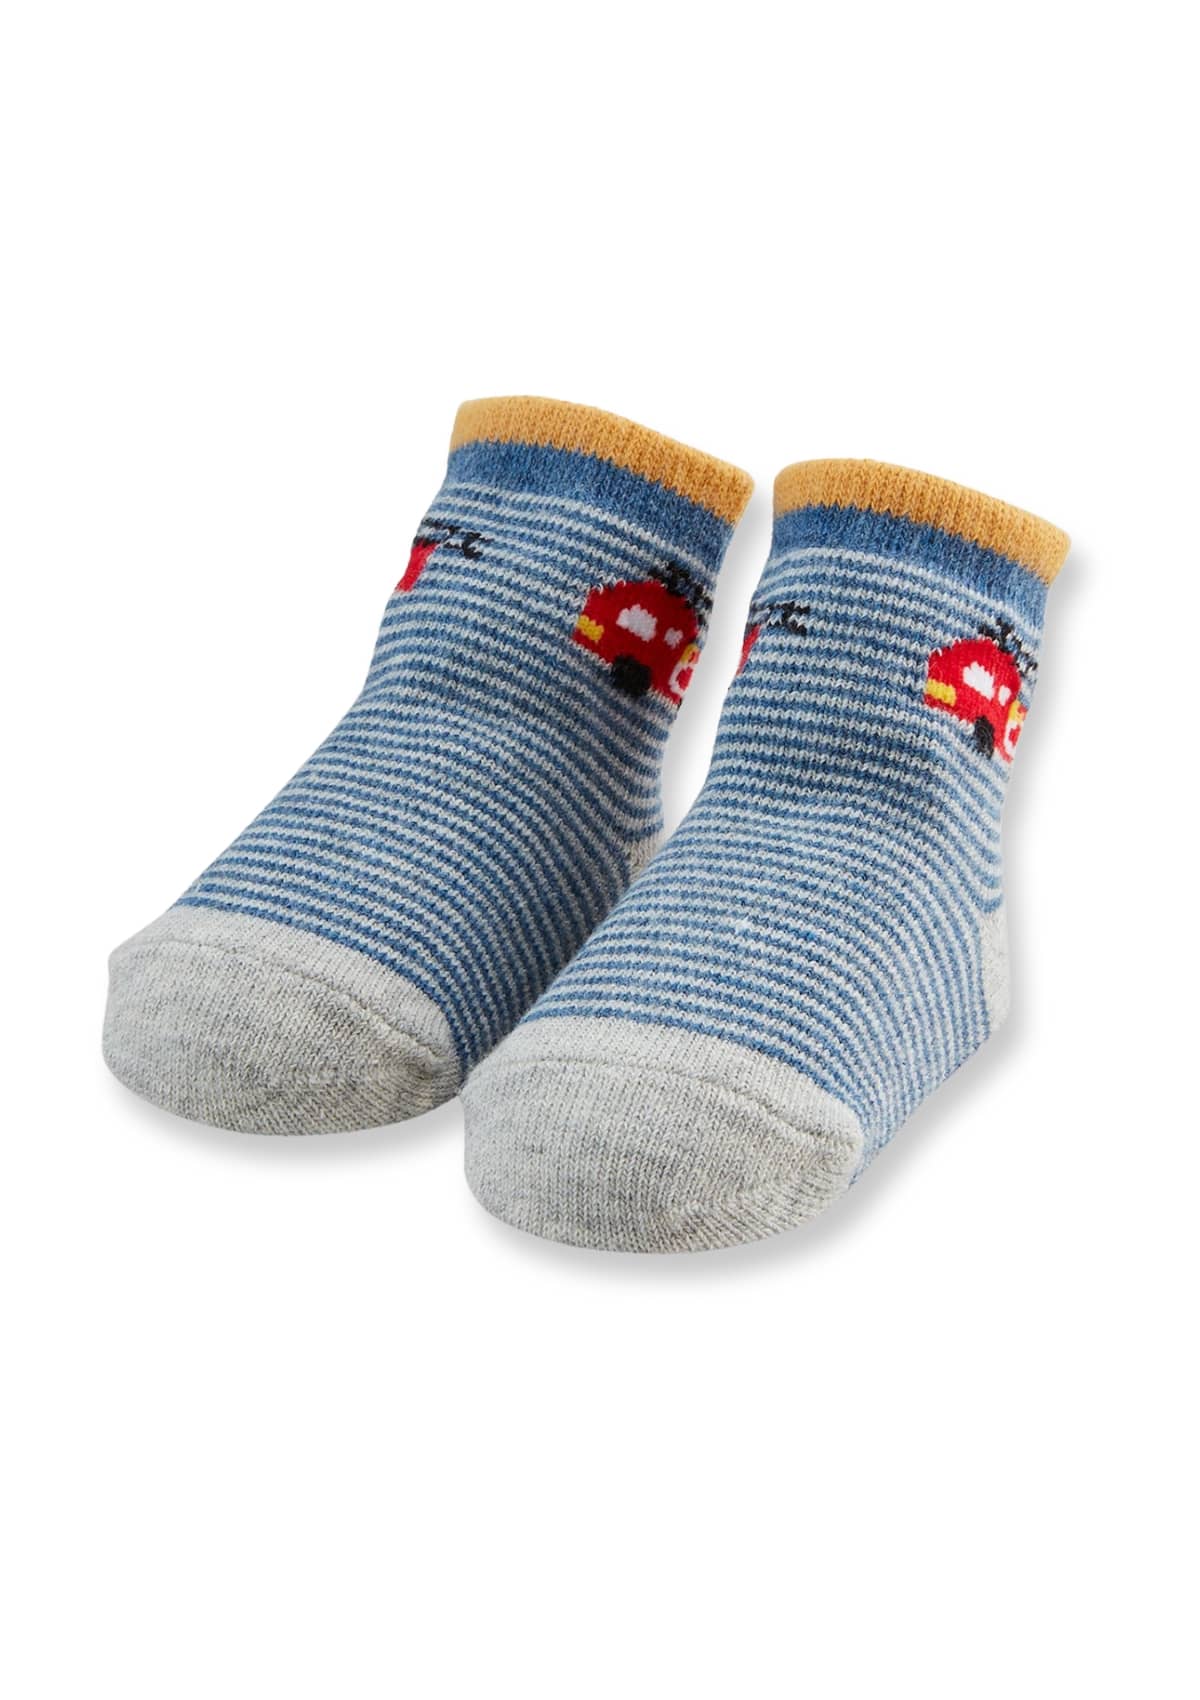 Accessories for the Littles-For the Littles-Socks for the Littles-Ruby Jane.